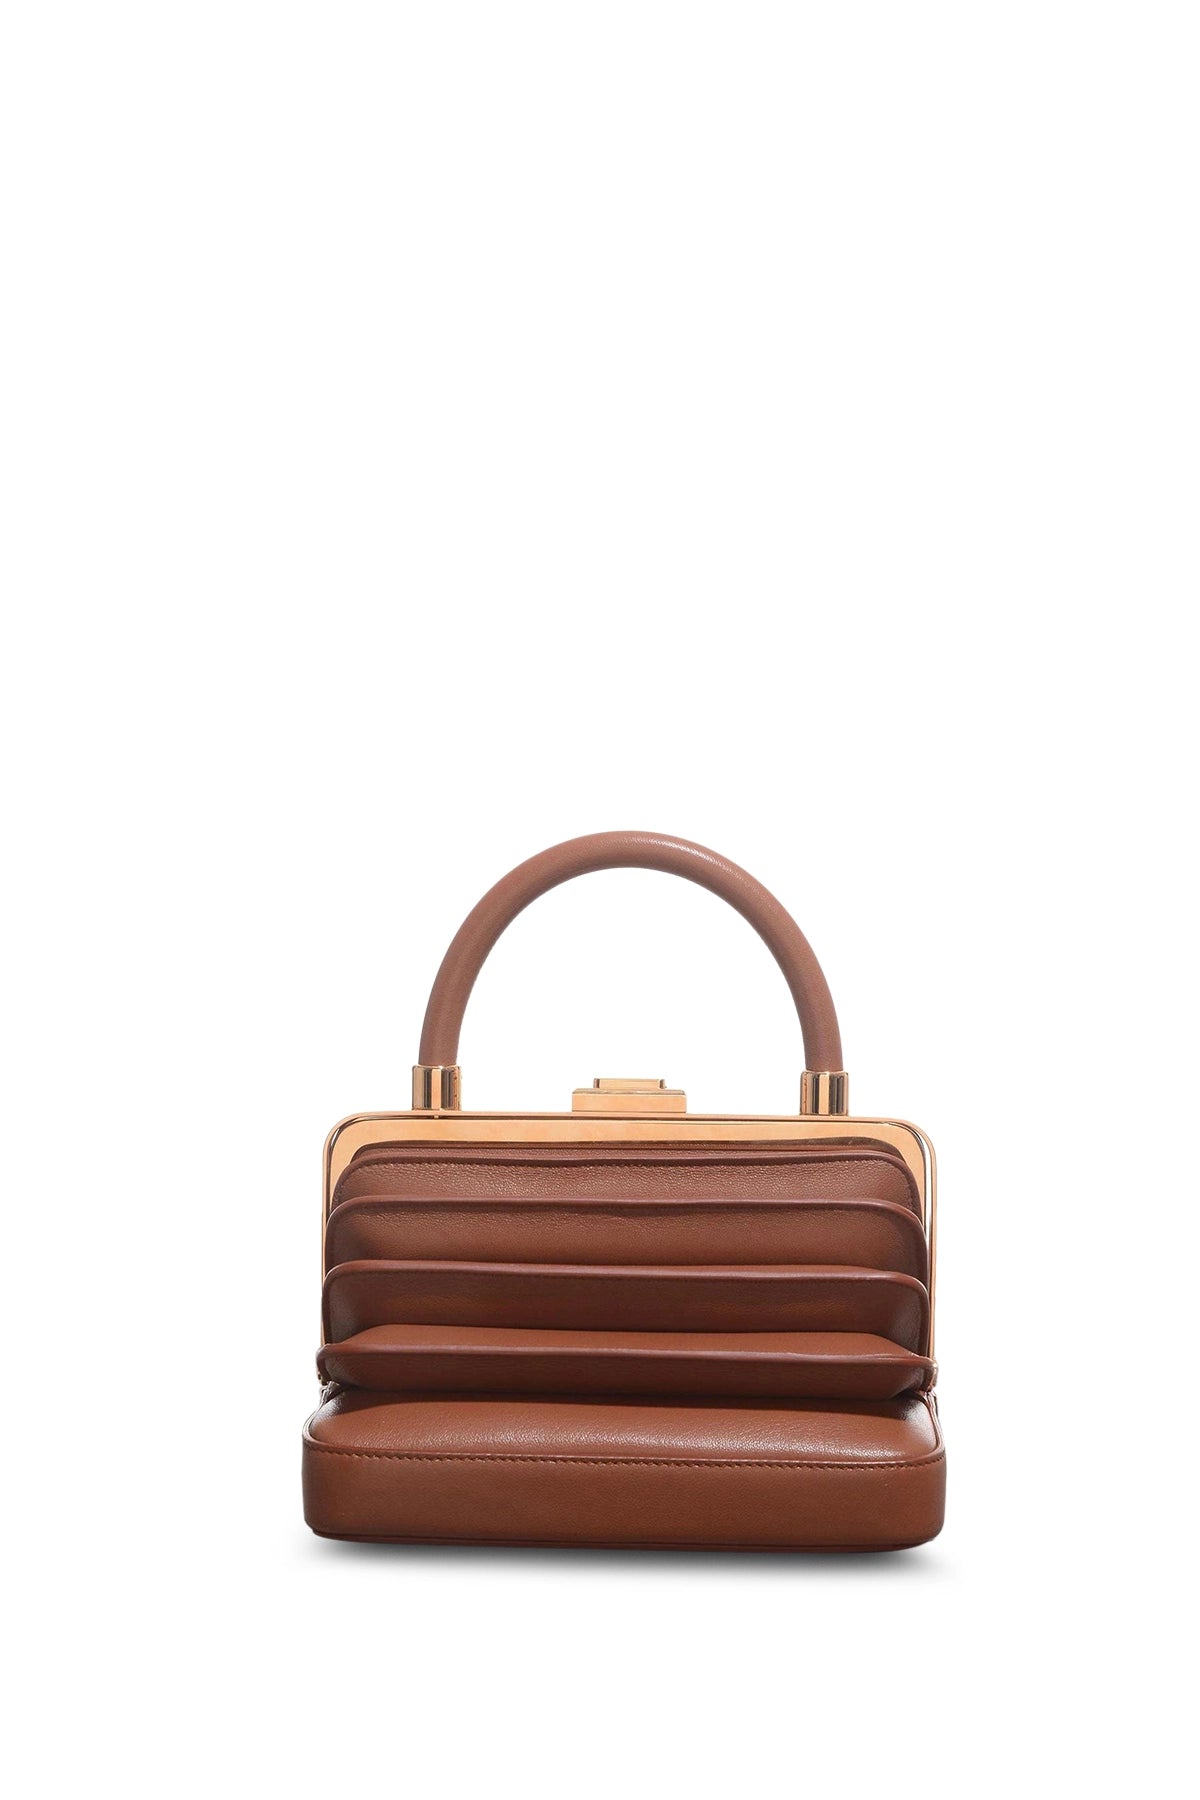 Diana Bag in Cognac Nappa Leather